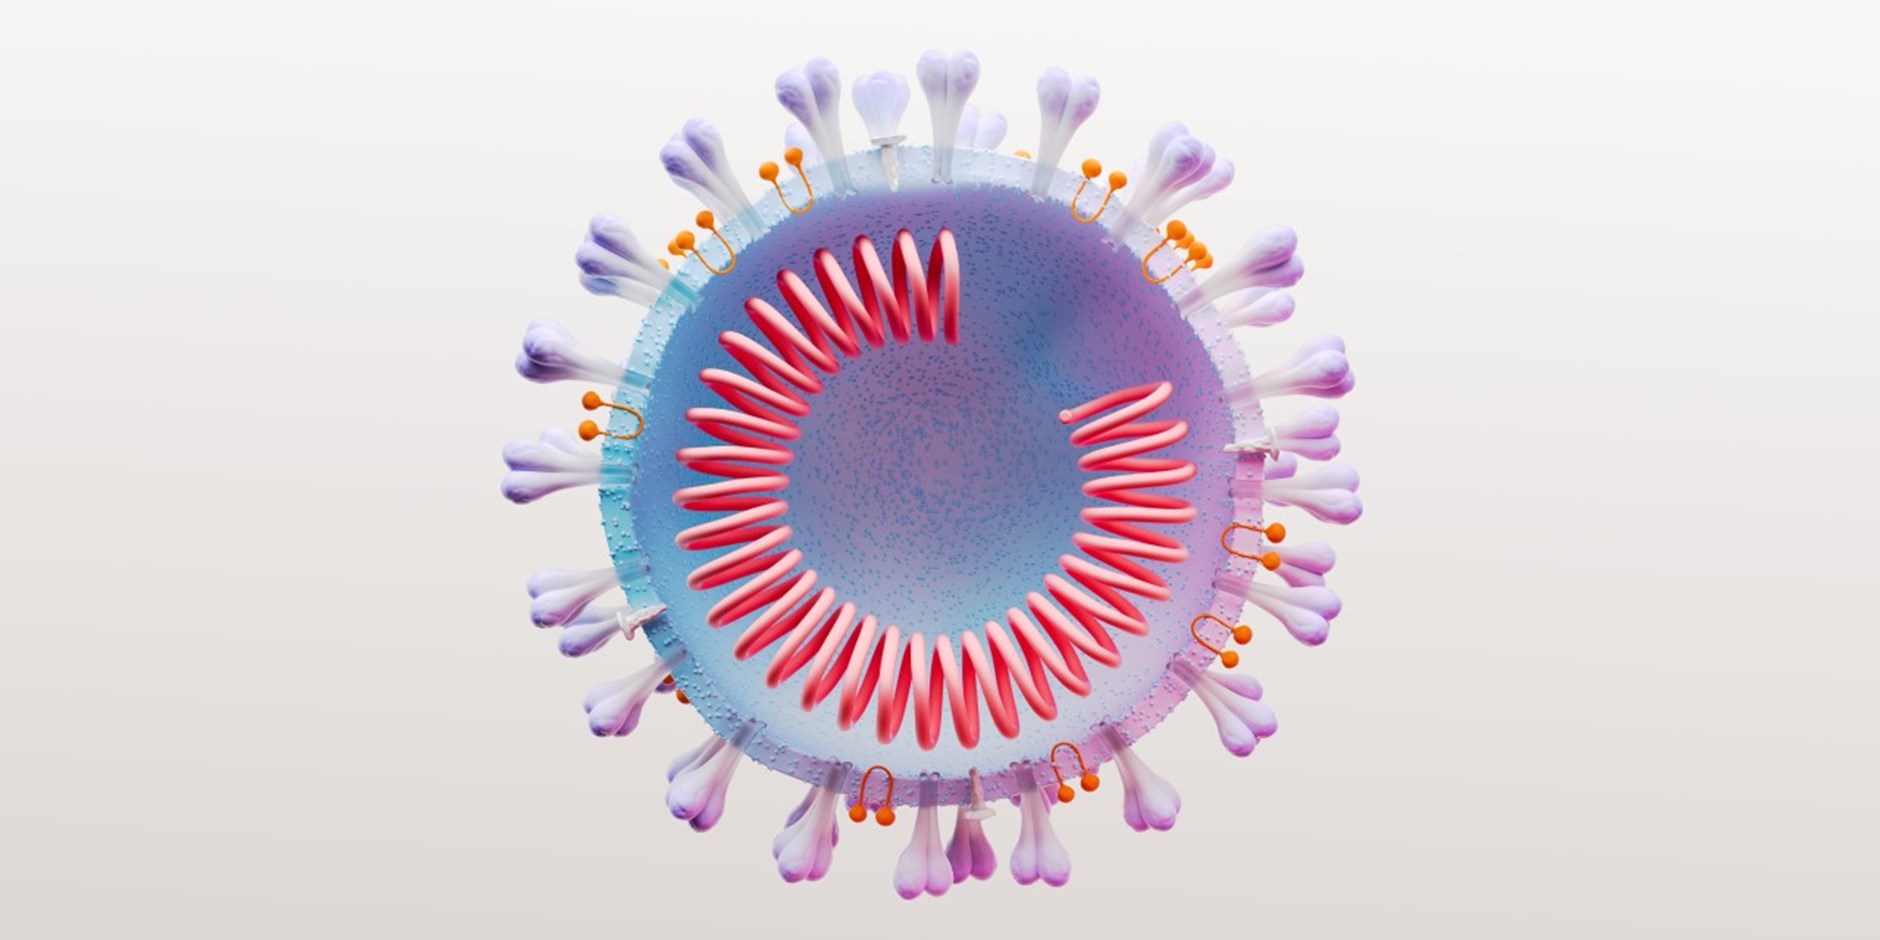 COVID virus cell cross section